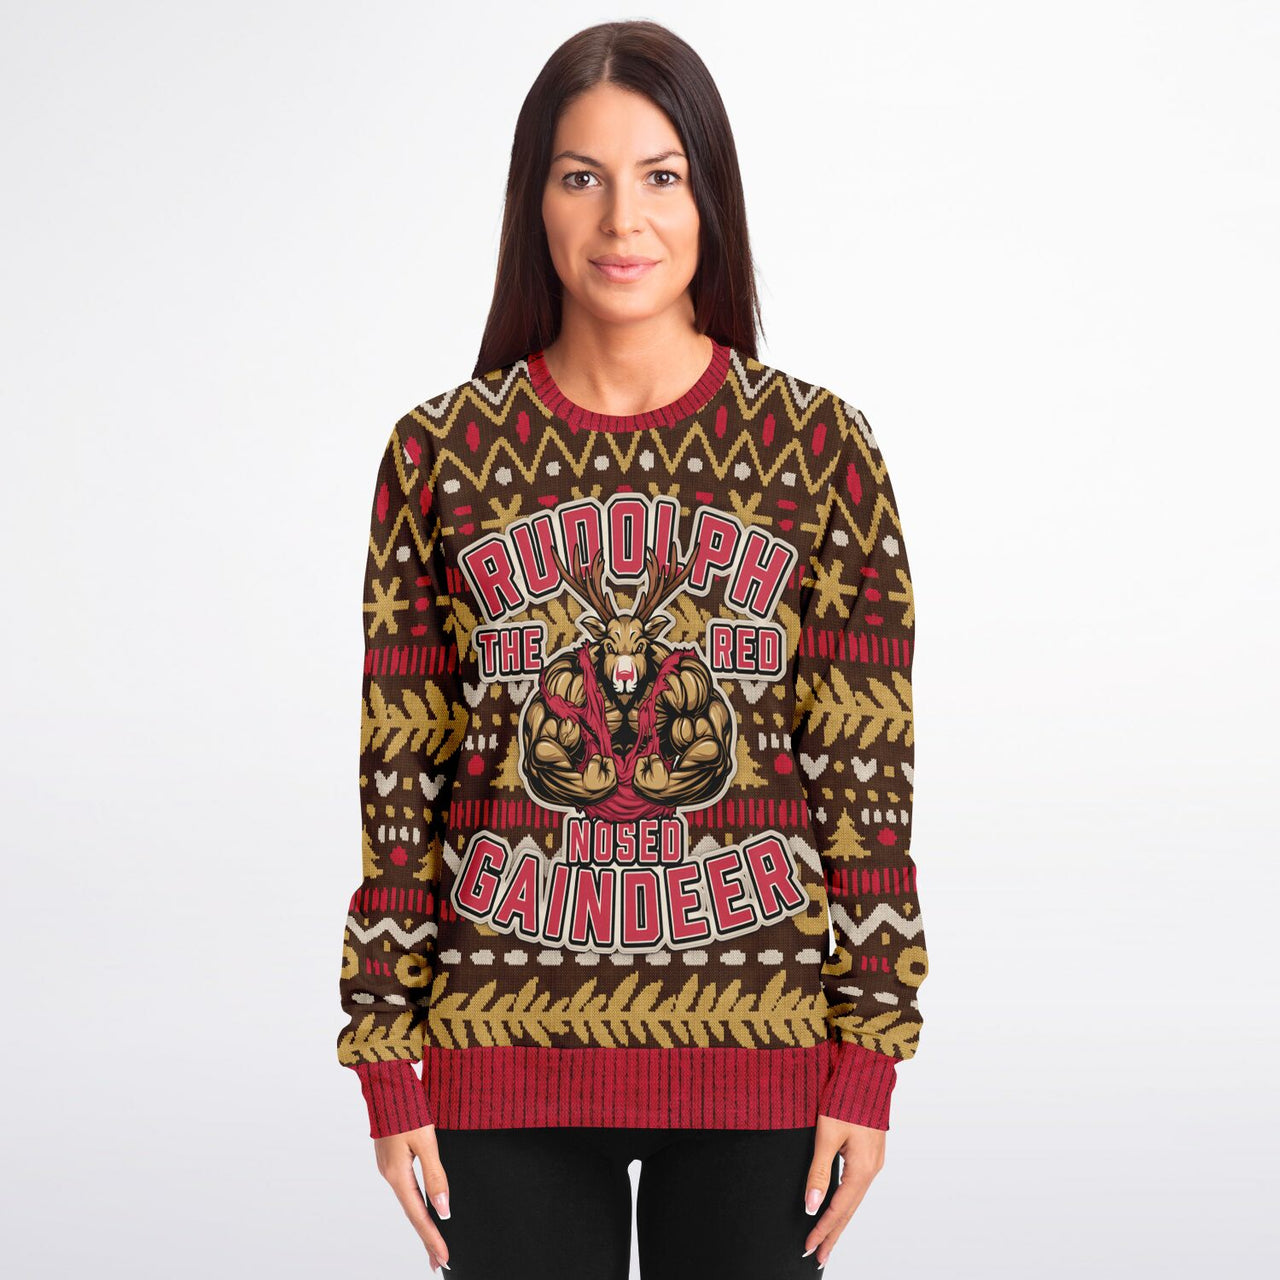 Rudolph the Red Nosed Ugly Christmas Fashion Sweatshirt - Adult AOP